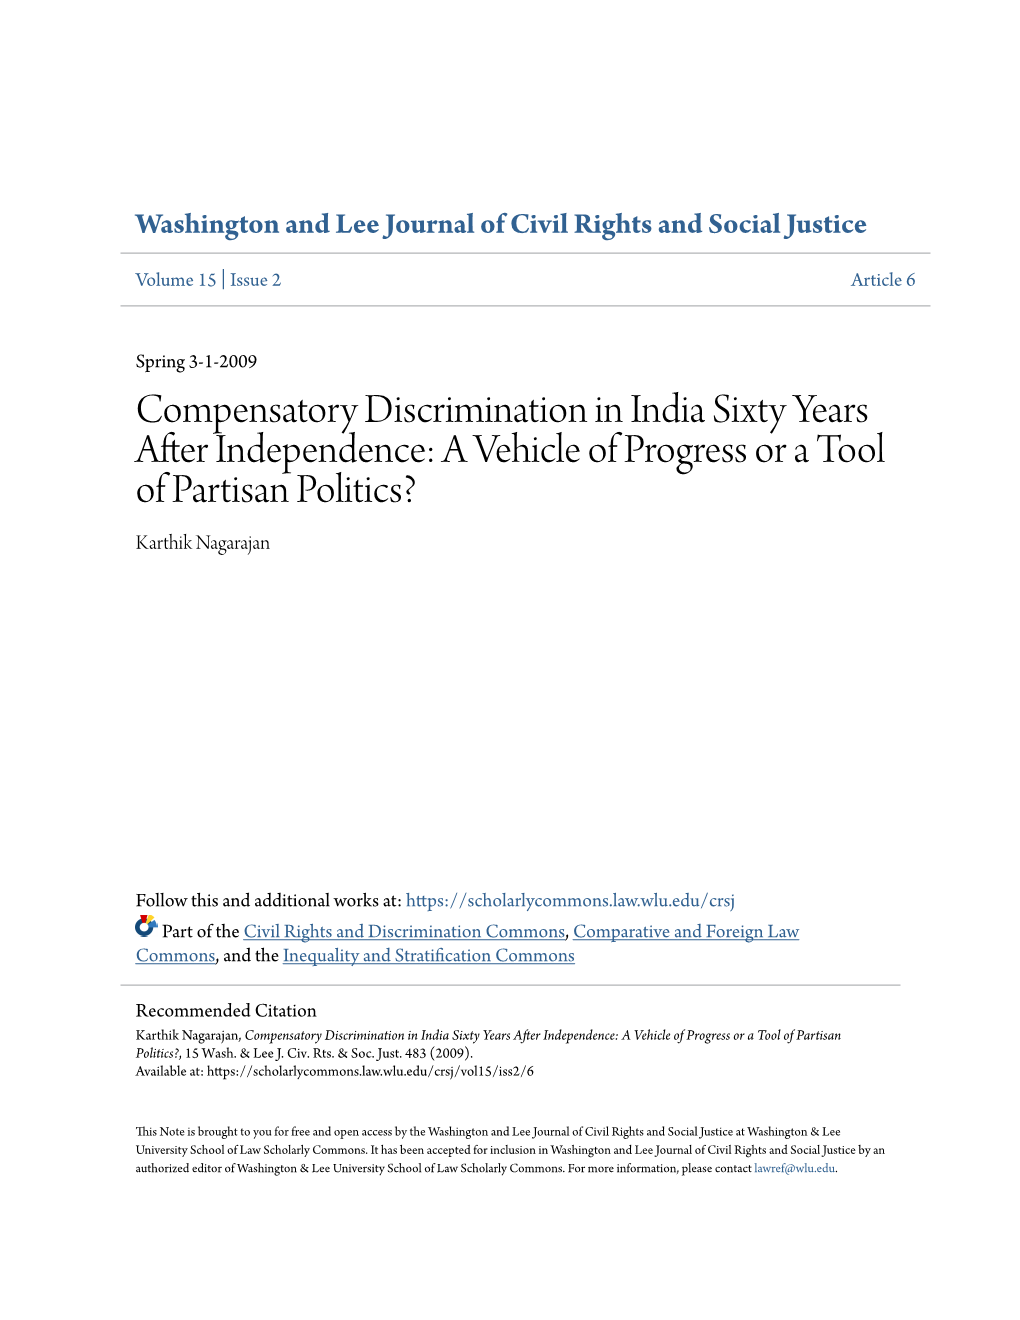 Compensatory Discrimination in India Sixty Years After Independence: a Vehicle of Progress Or a Tool of Partisan Politics? Karthik Nagarajan